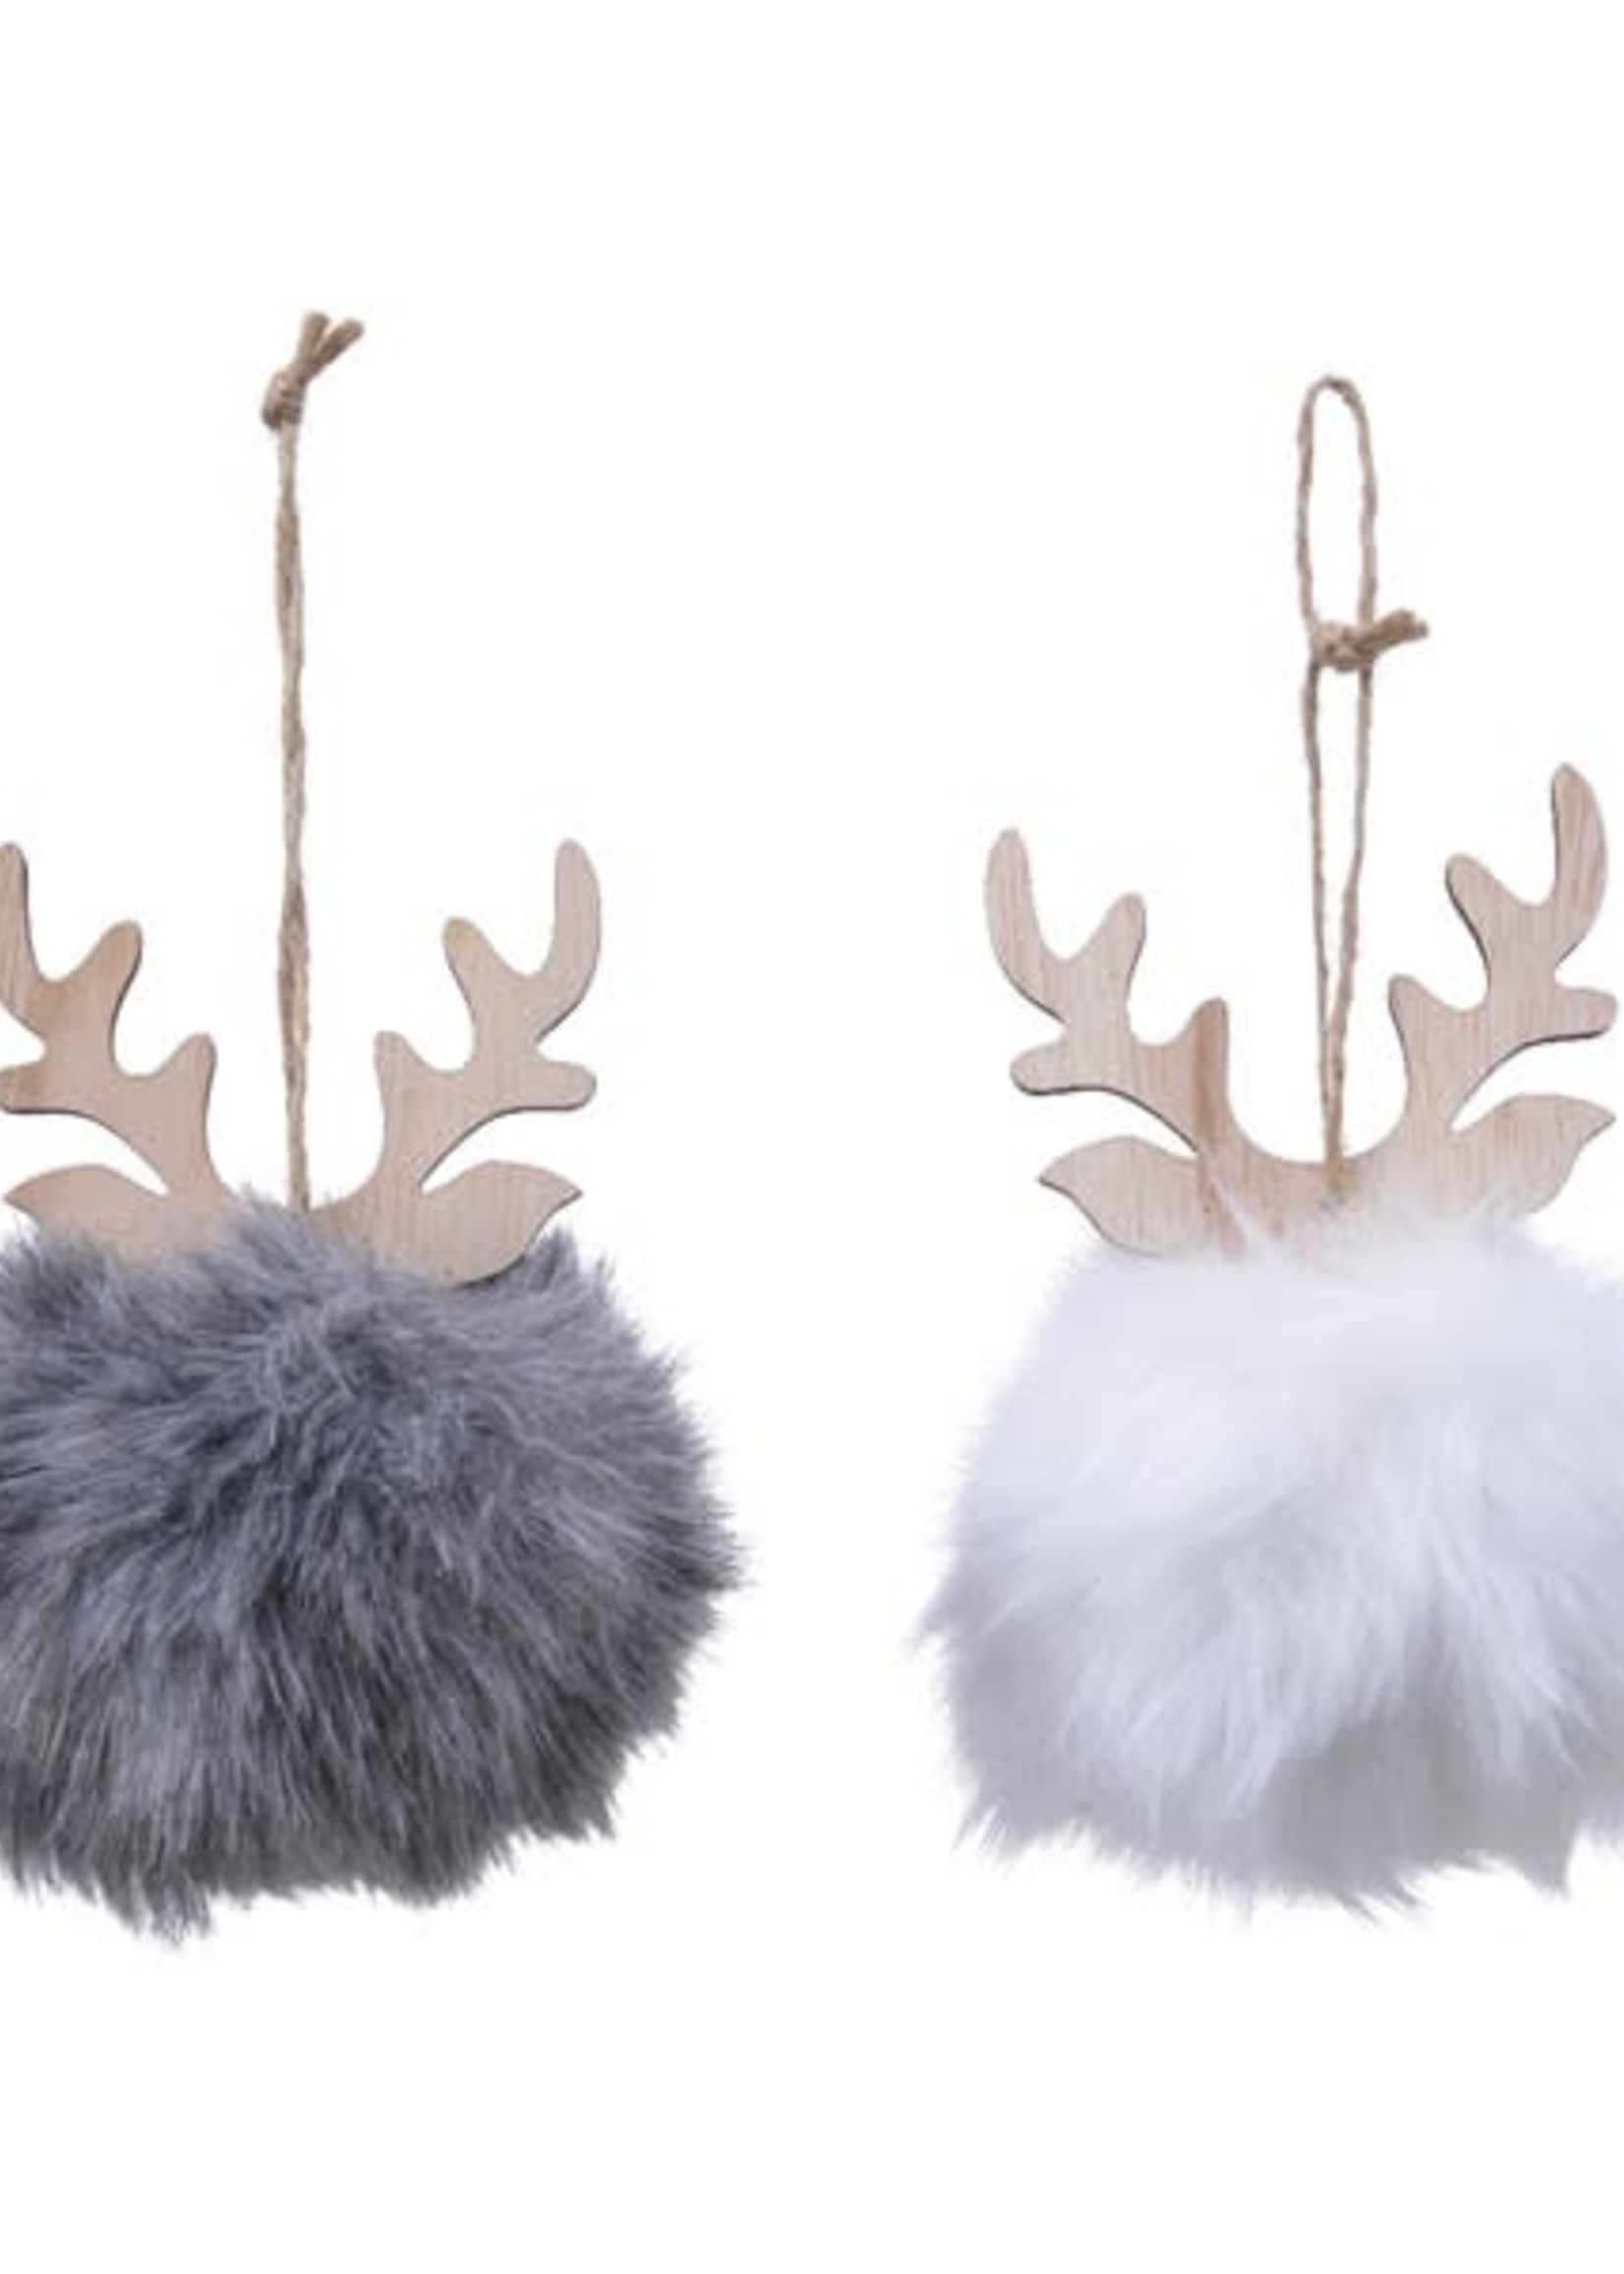 Design Decor Ball polyester faux fur w/ antlers